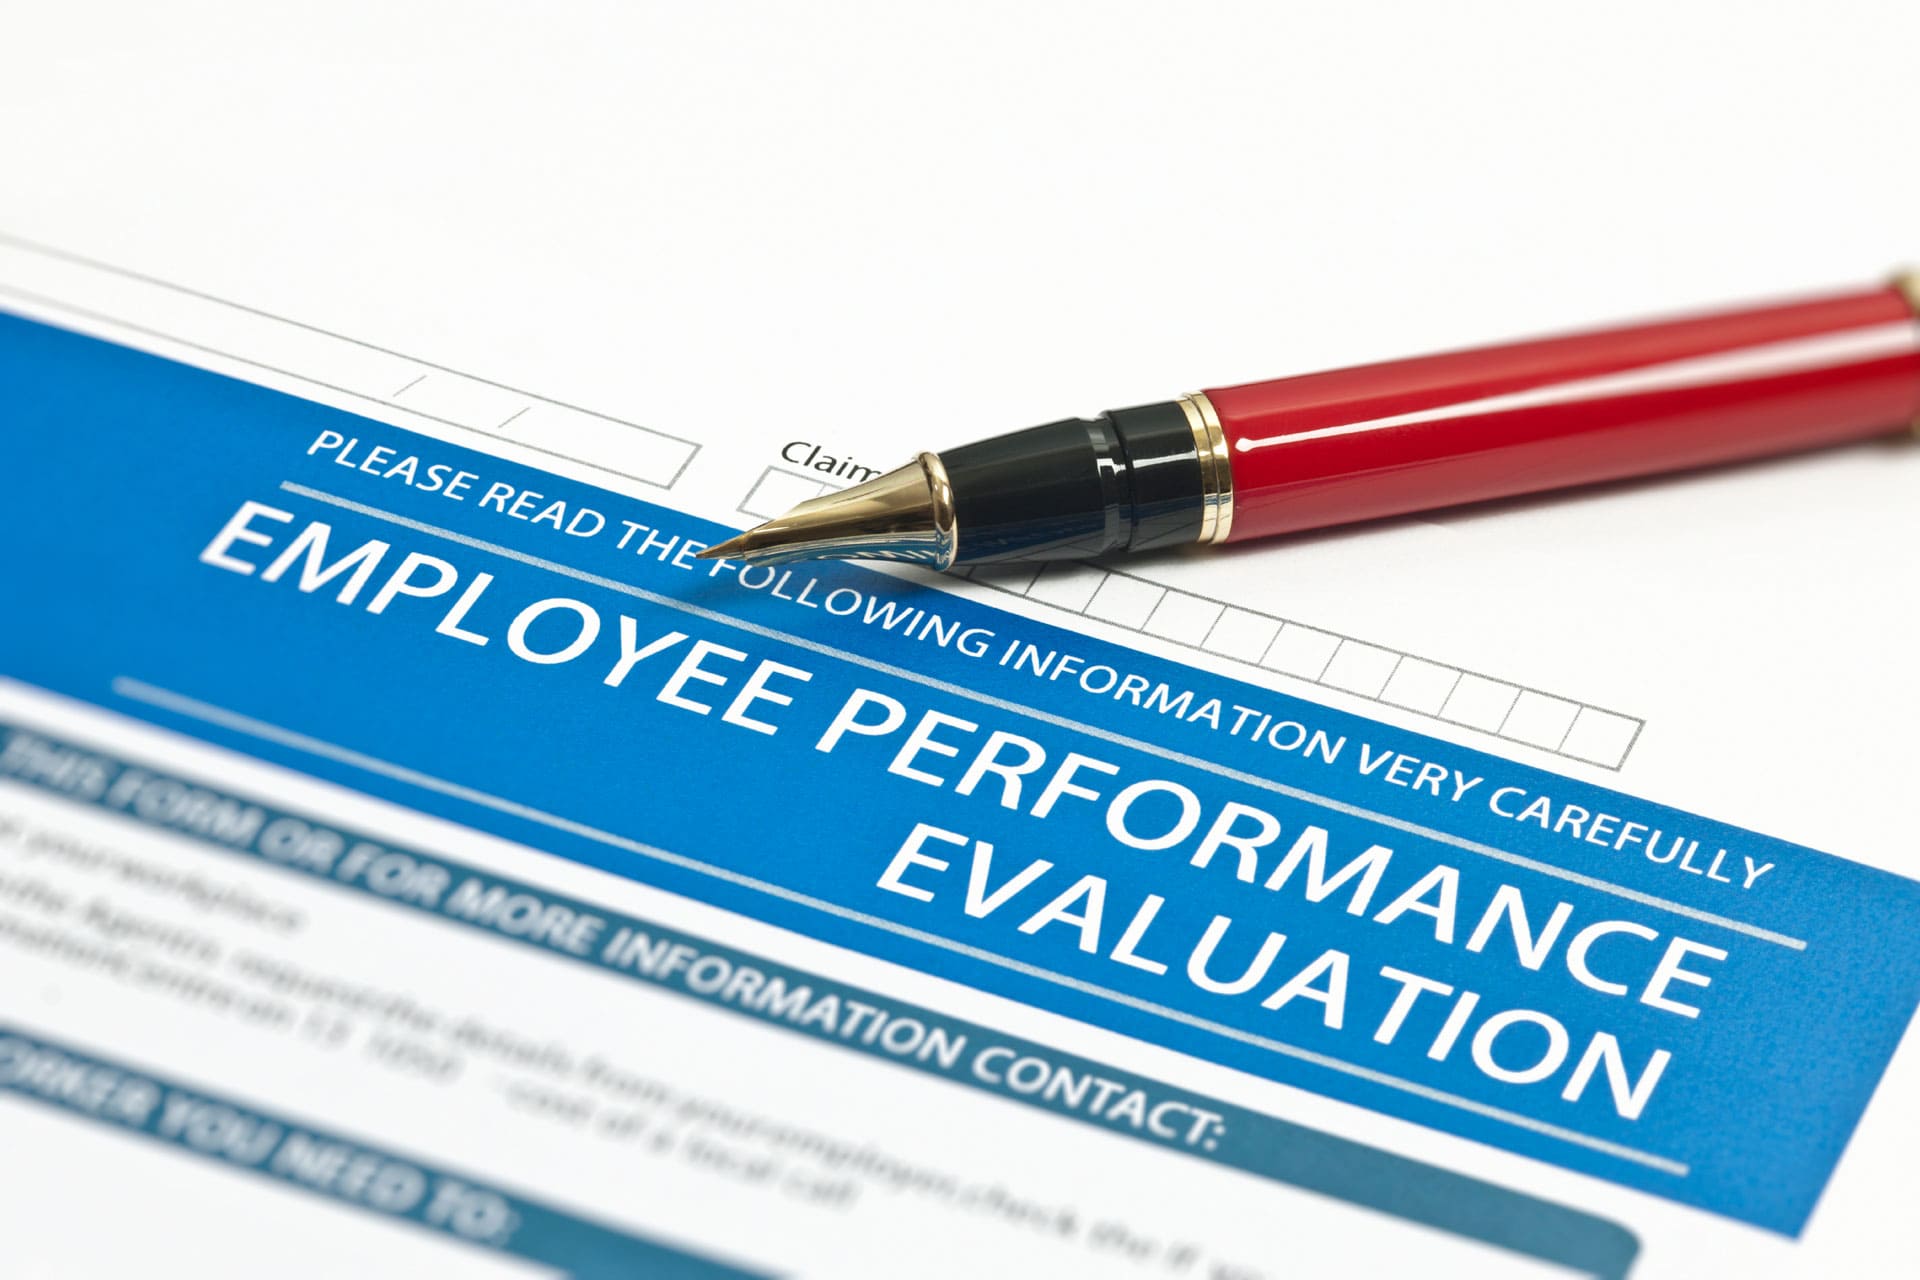 Employee Performance Review